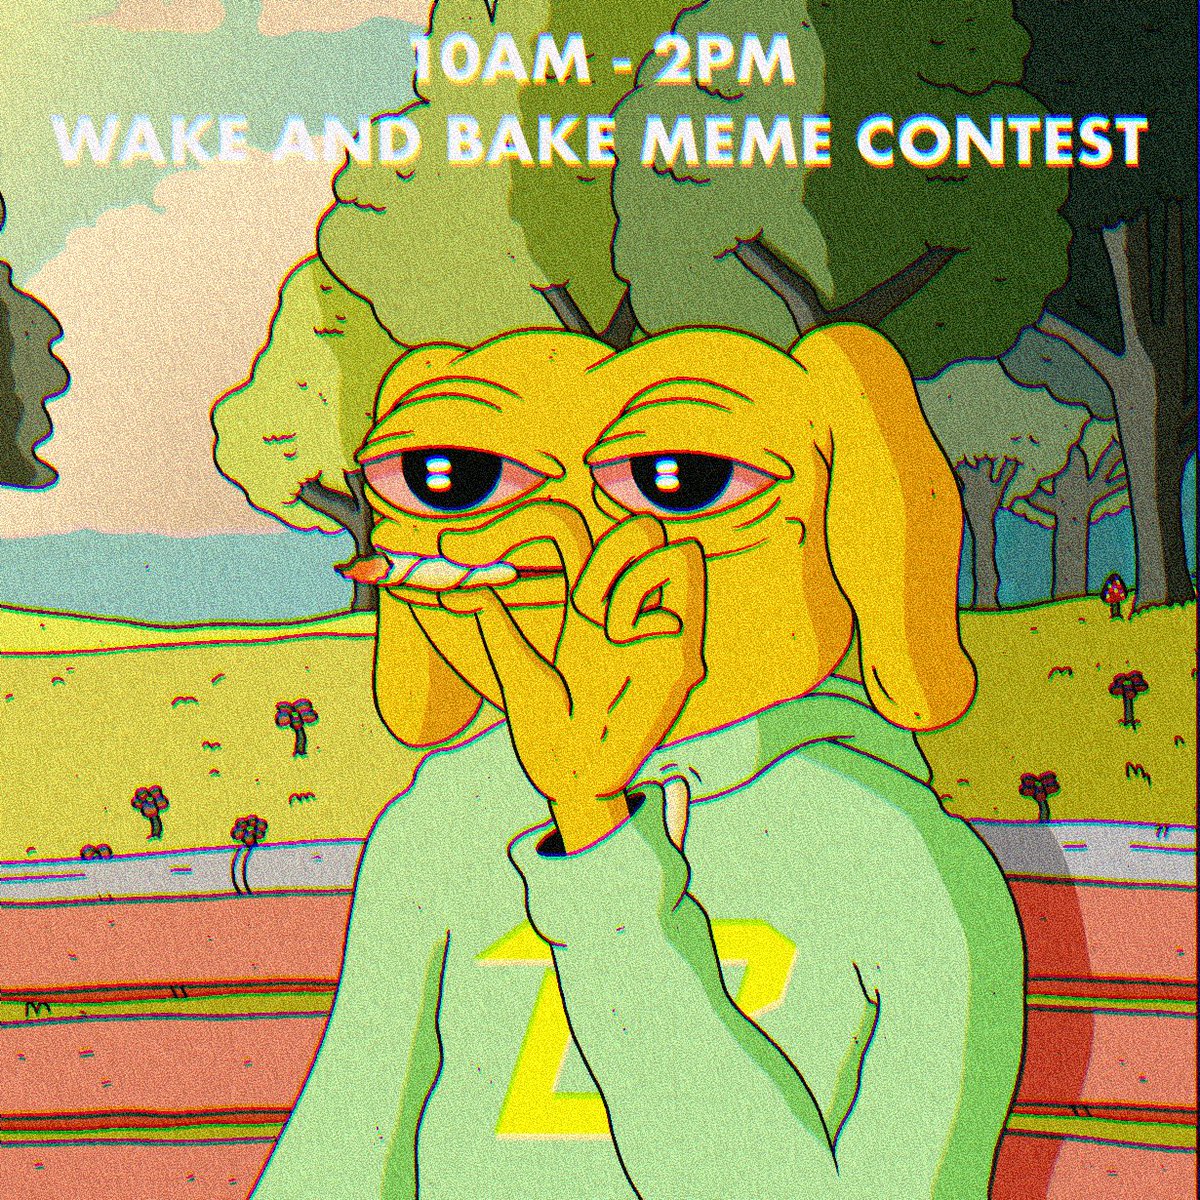 4/20 starts with a wake and bake meme contest with a prize pool of 6,666 $ANDY ($900) 🟡 There will be 5 winning submissions sharing the pot 🟡 Post your submission under this tweet 🟡 Be creative and funny 😄 Time Starts now ⏰ Good luck 🤞